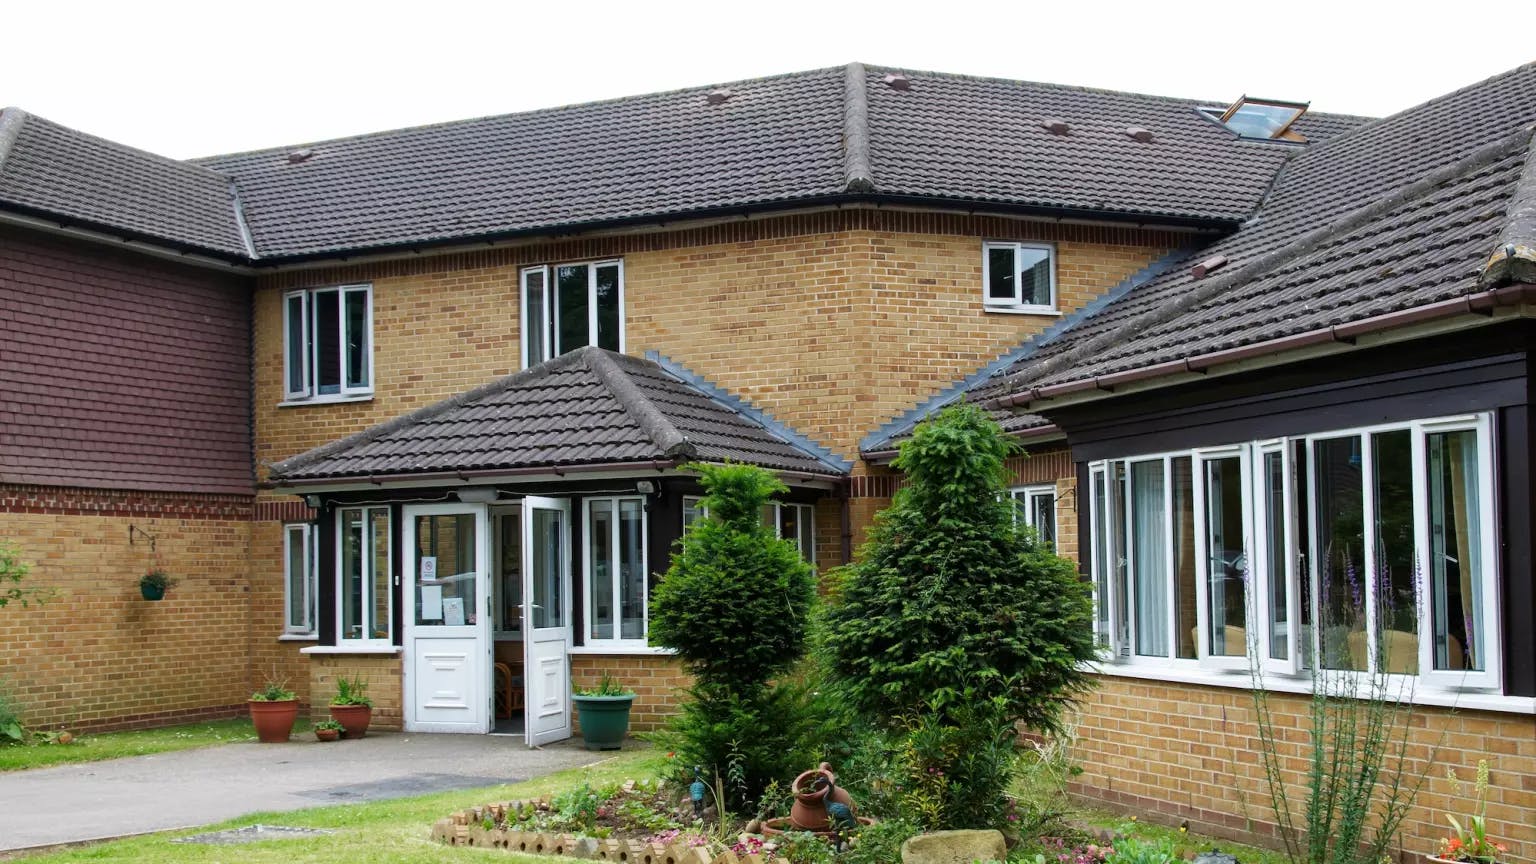 Exterior of Belmont View care home in Hoddesdon, Hertfordshire